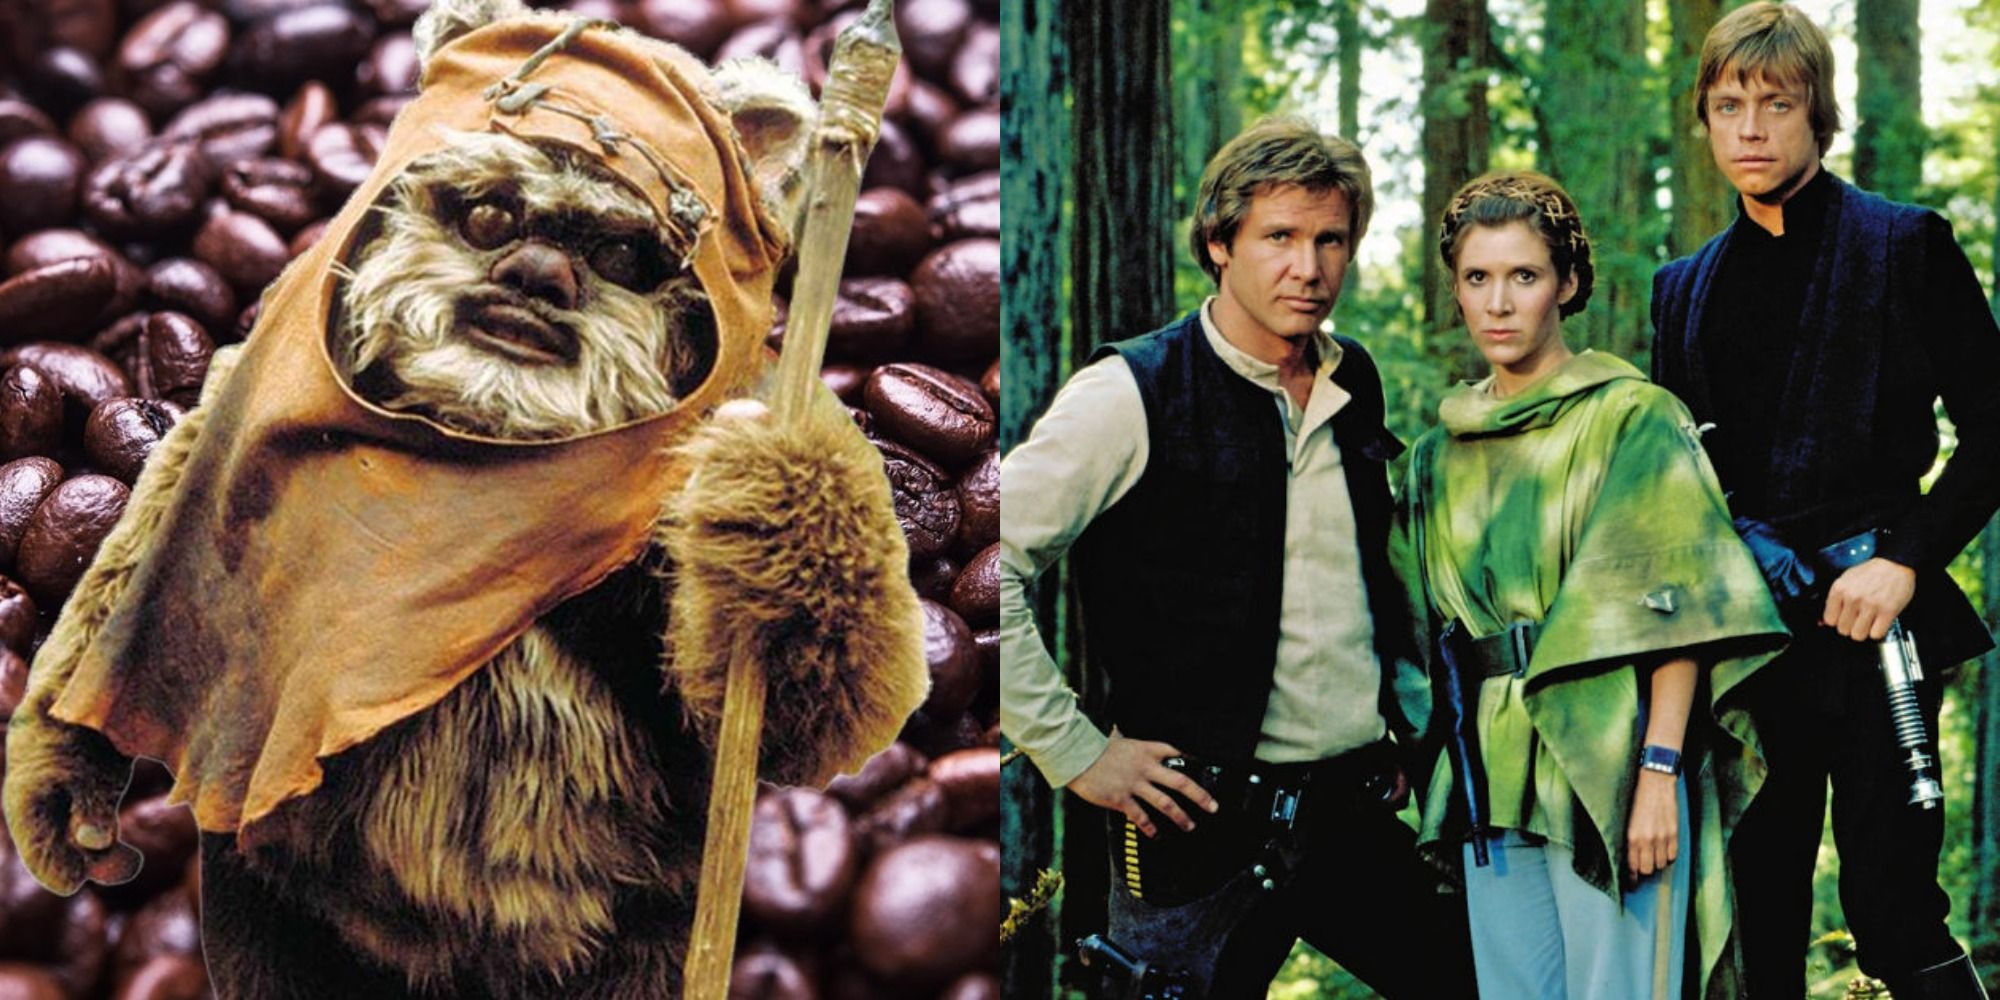 https://static1.srcdn.com/wordpress/wp-content/uploads/2022/04/Split-image-of-Wicket-in-front-of-coffee-beans-and-Han-Leia-and-Luke-at-Endor-in-Return-of-the-Jedi.jpg